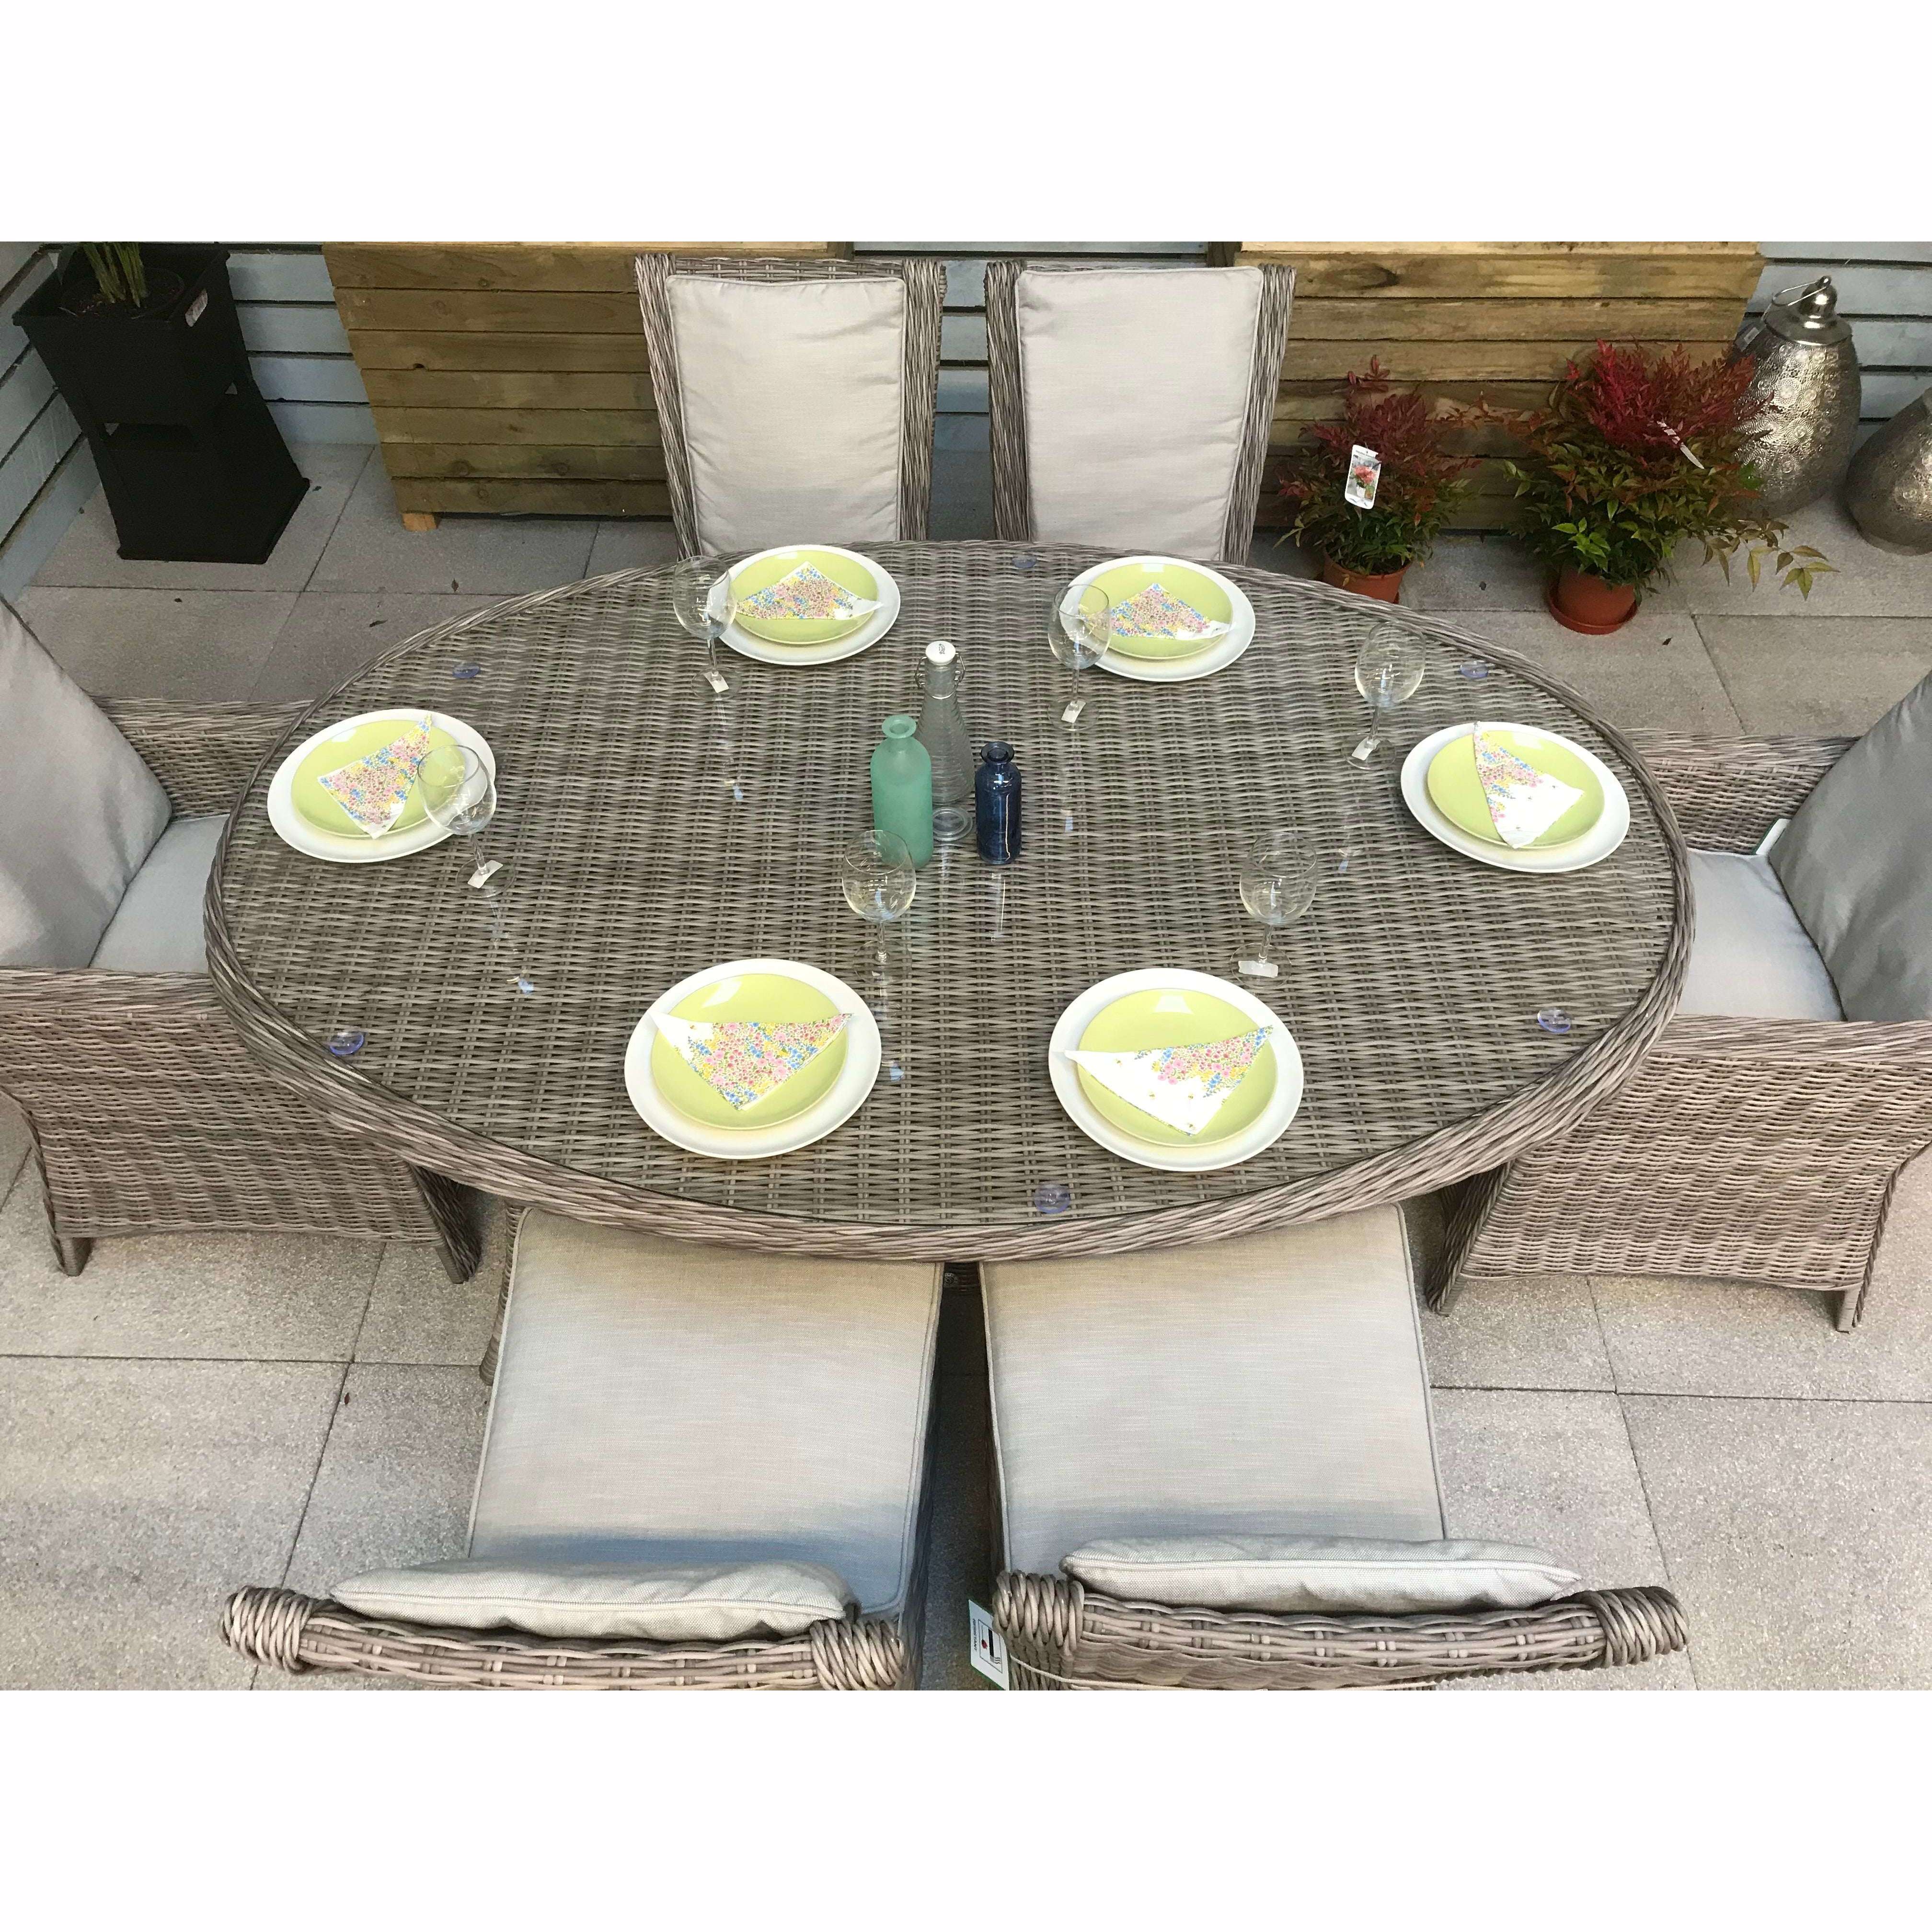 Exceptional Garden:Signature Weave Alexandra 6-Seater Dining Set with Oval Dining Table